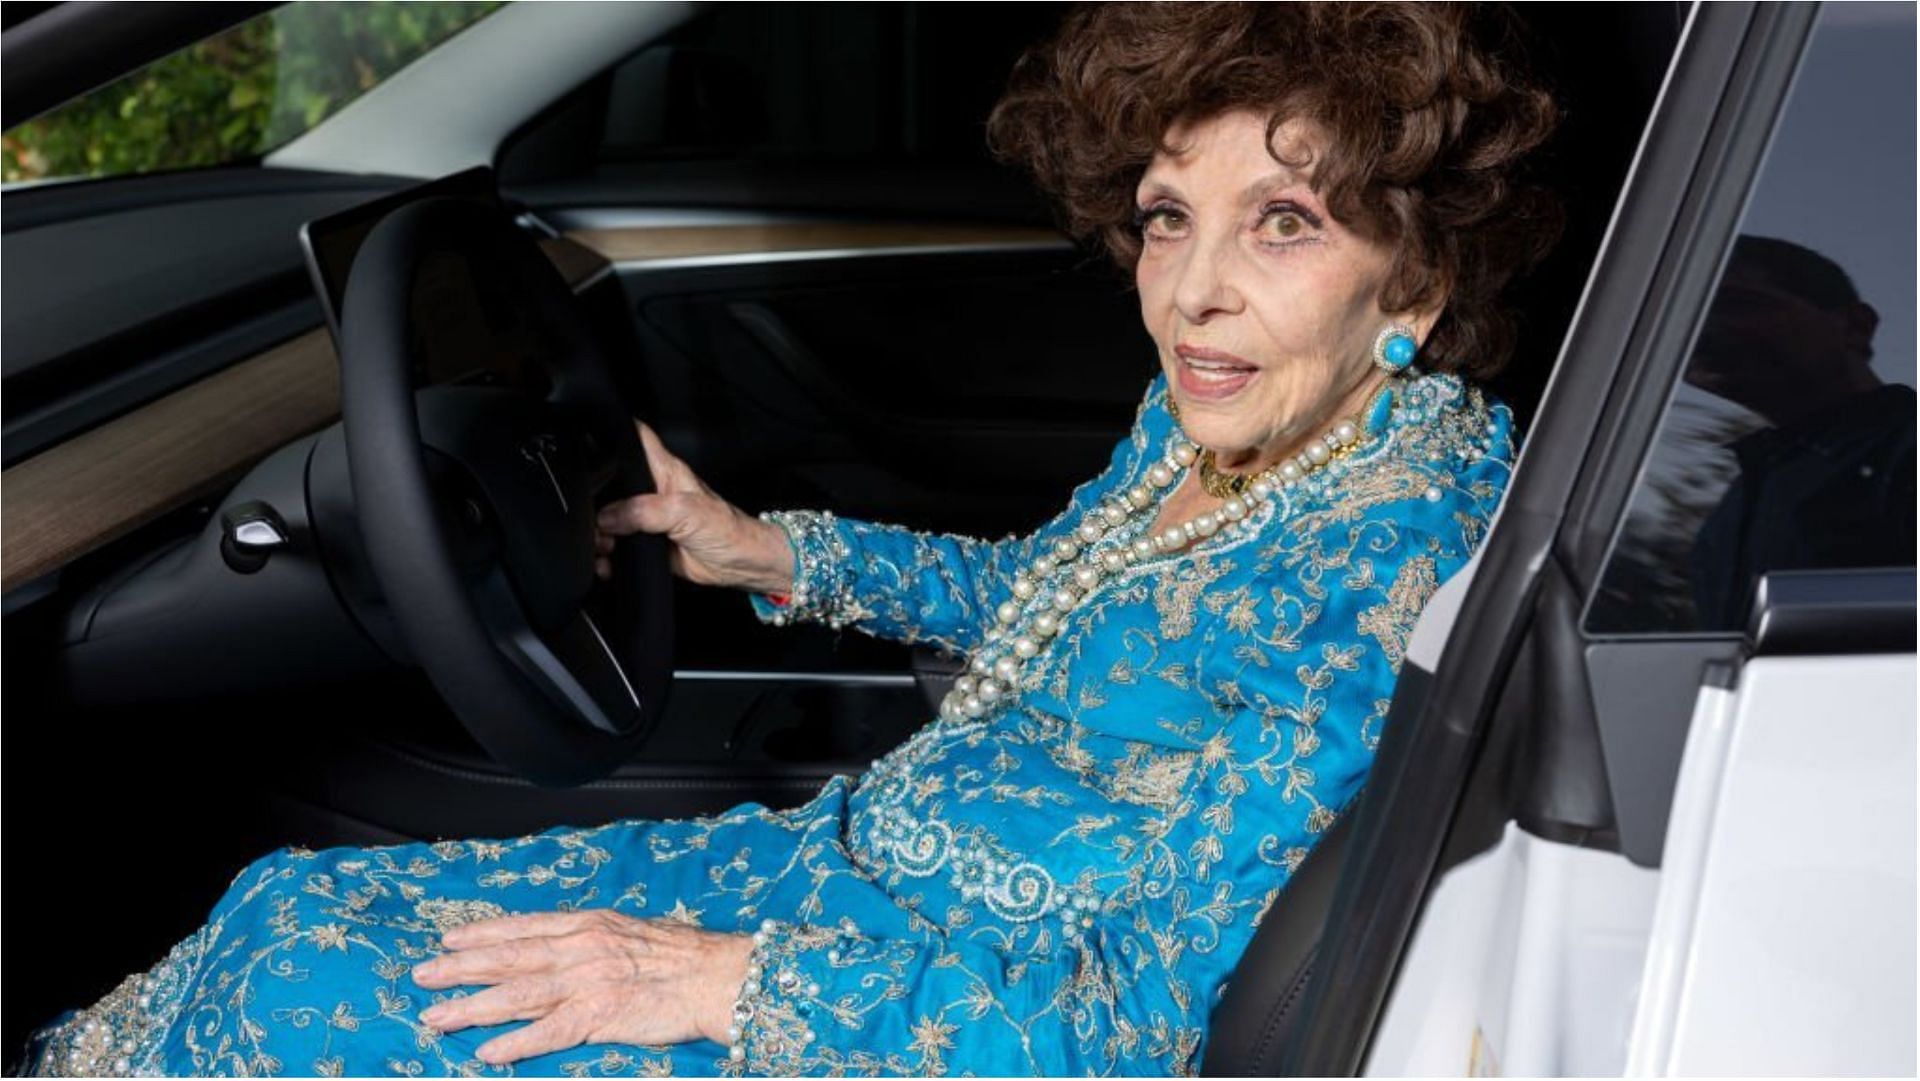 Gina Lollobrigida recently died at the age of 95 (Image via Daniele Venturelli/Getty Images)